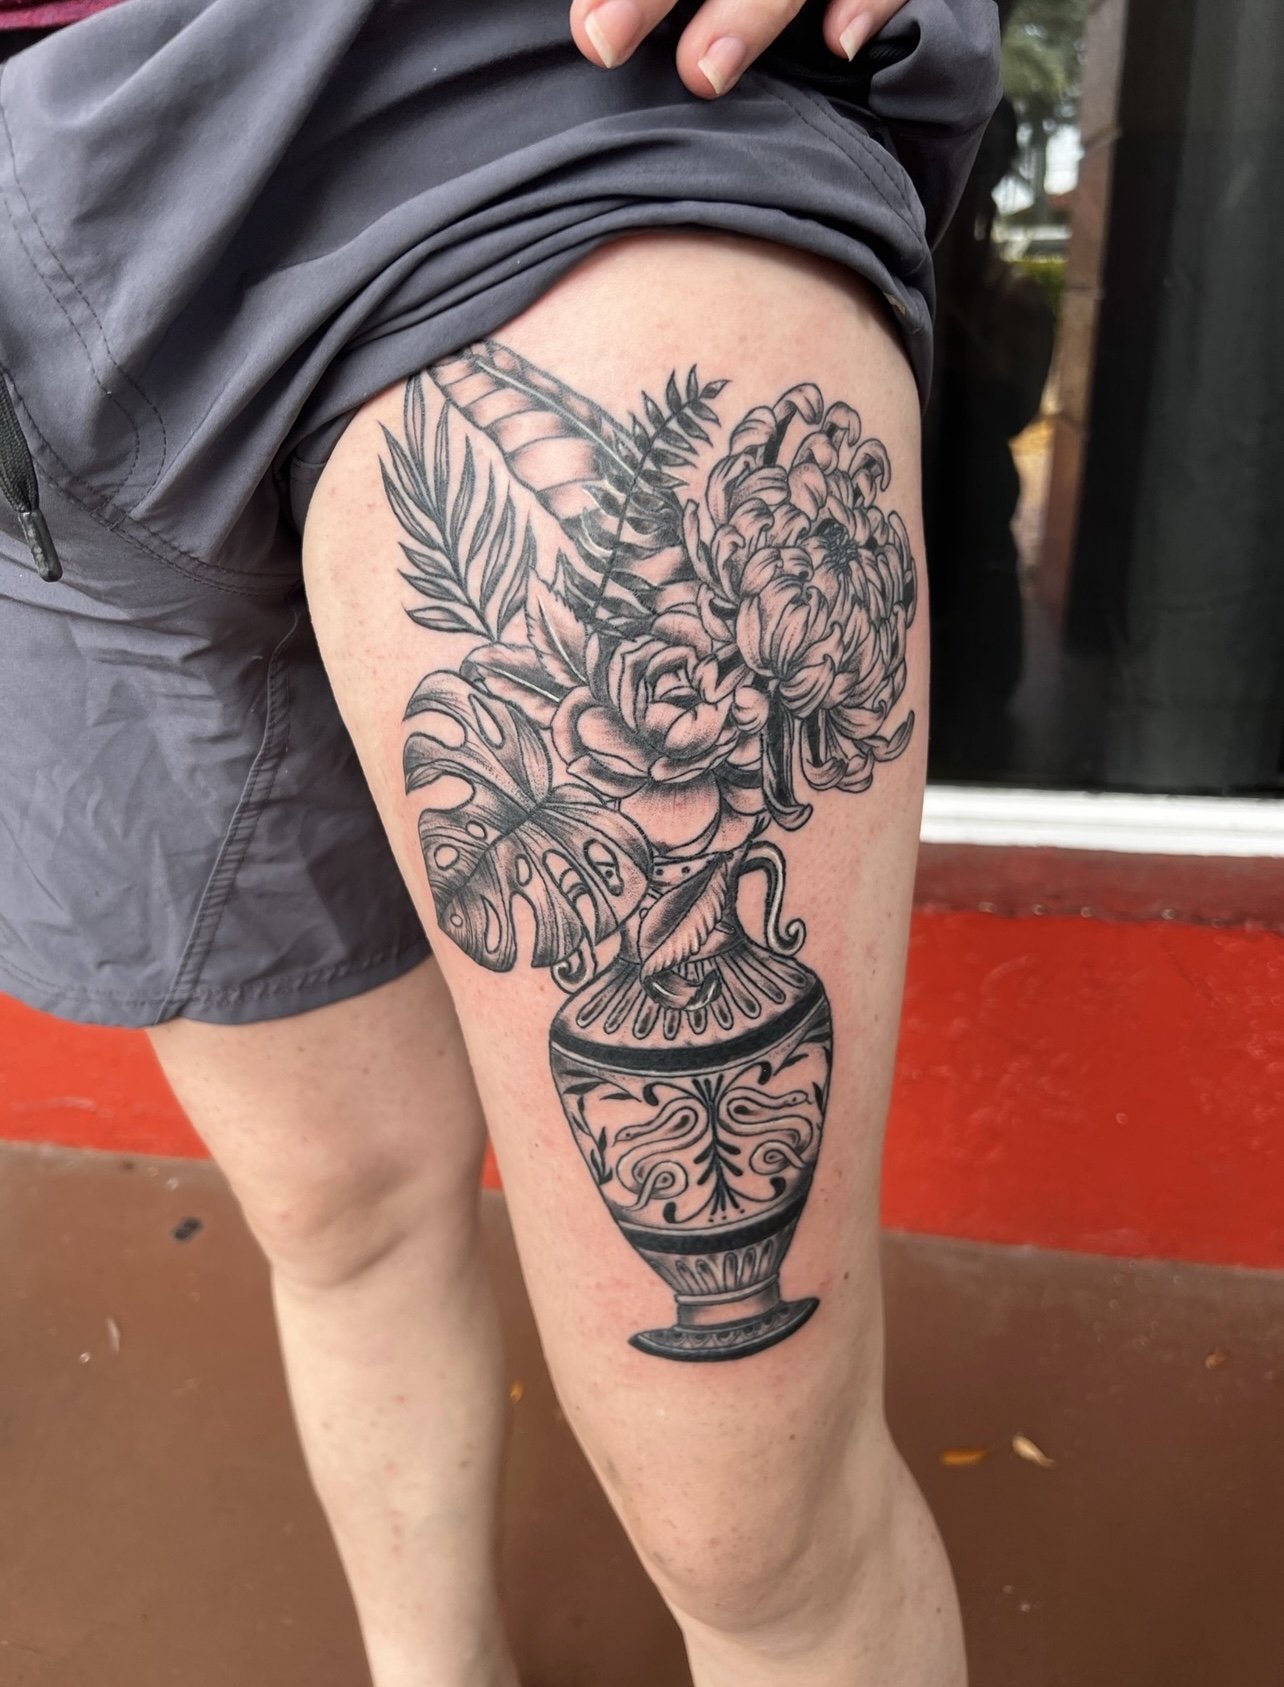 Tattoo uploaded by Xavier  Traditional American tattoo by Ozzy Ostby  OzzyOstby traditionalamerican trads traditional vase  Tattoodo